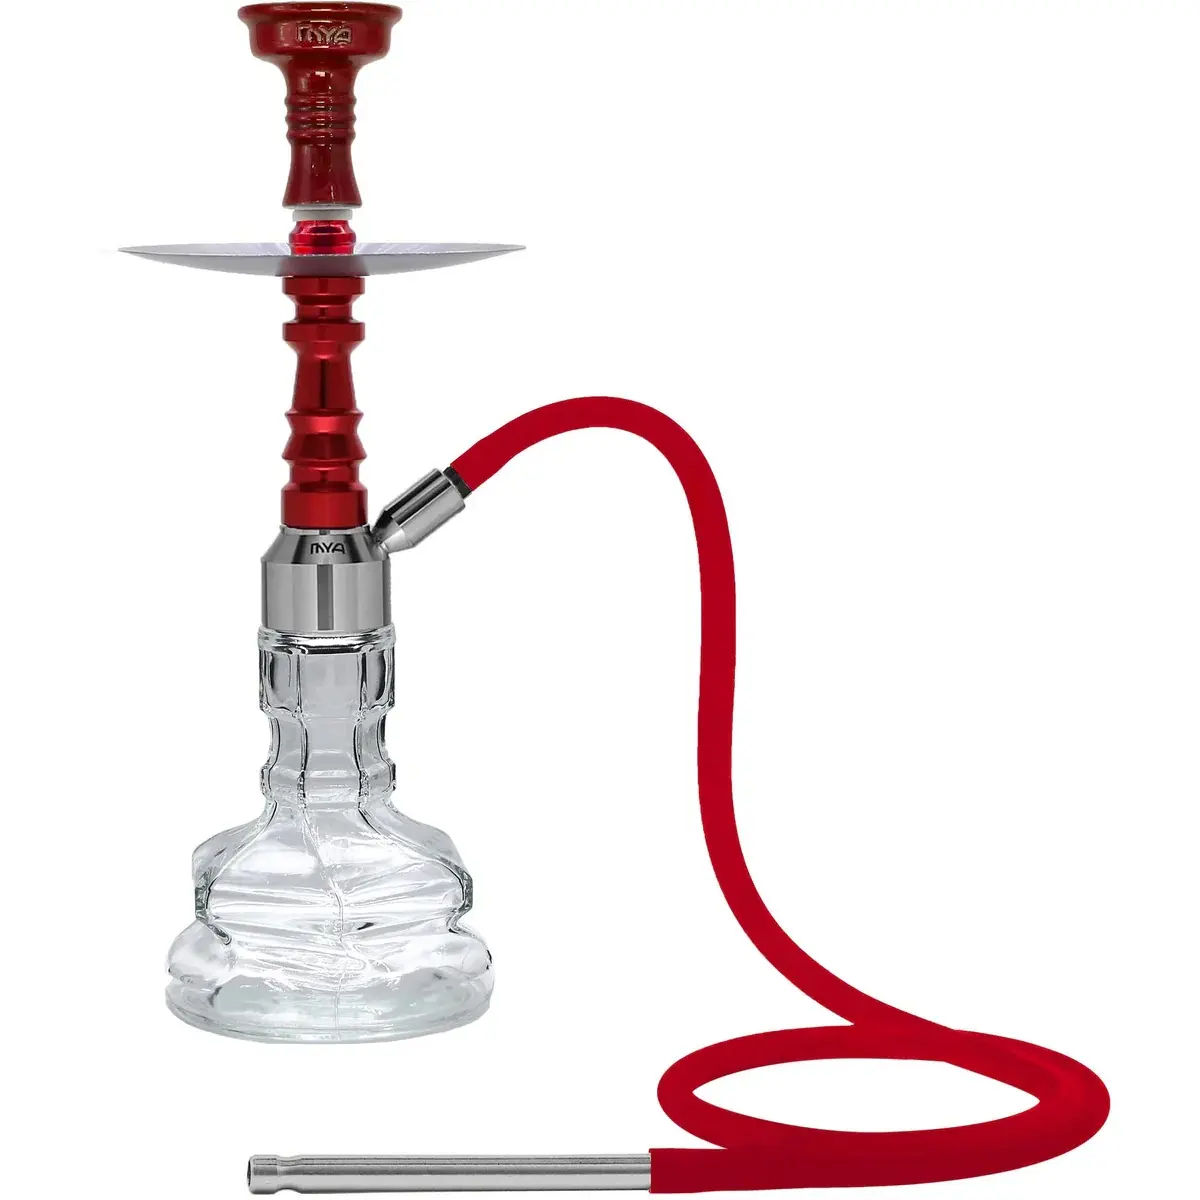 Hot Selling Red Shisha Hookah Metal And Glass Parts For Sale Fancy Barware Smoking Tool Cigarette Pipe Latest Tobacco Hookah